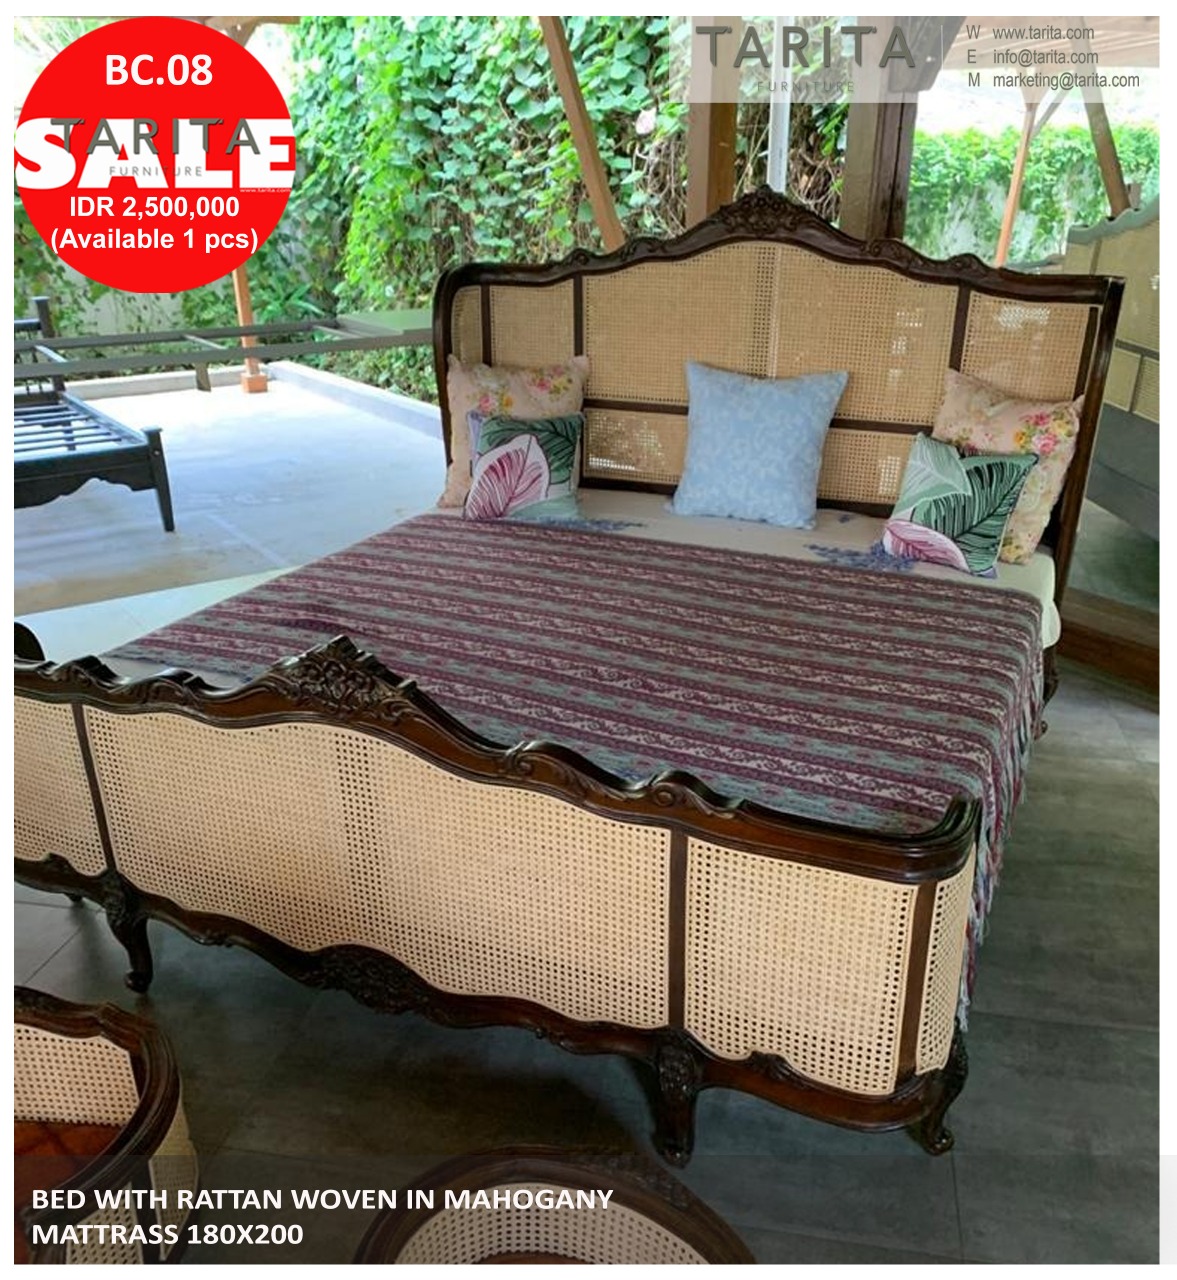 pijpleiding oogsten fictie BED FRENCH STYLE IN MAHOGANY WITH RATTAN WOVEN 180 X 200 – Tarita Furniture